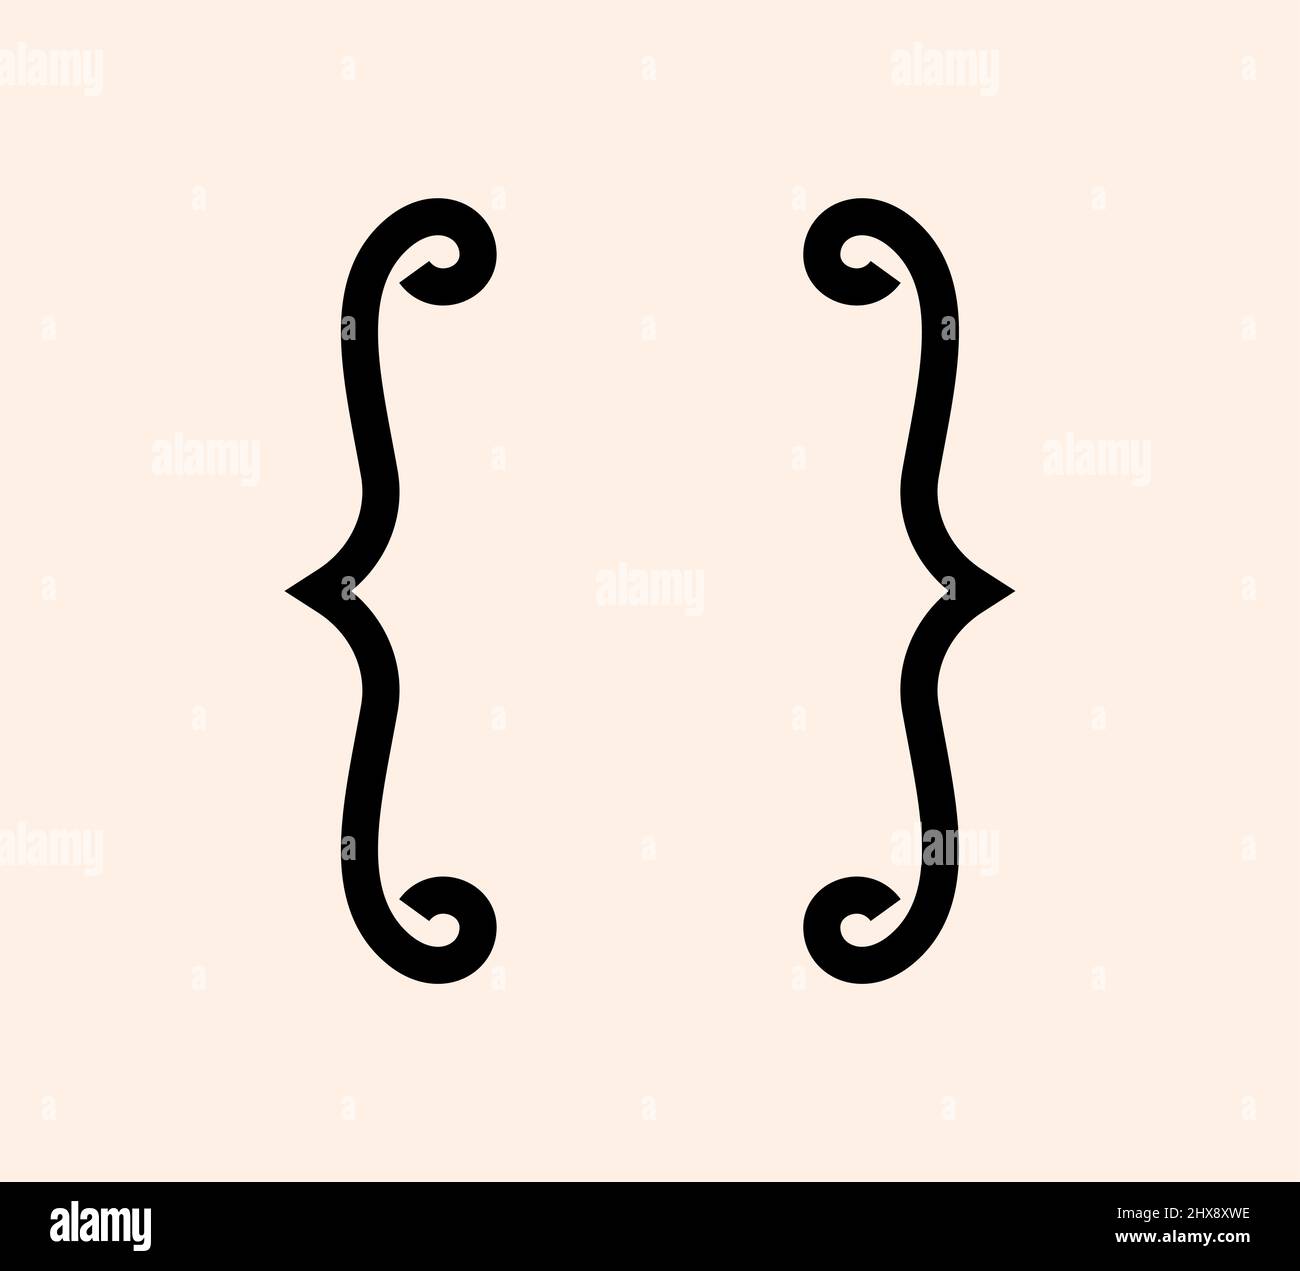 https://c8.alamy.com/comp/2HX8XWE/curly-braces-punctuation-mark-black-icon-vintage-parenthesis-brackets-symbol-for-typing-or-typography-ornament-and-vector-eps-isolated-design-element-concept-for-messages-and-quotes-2HX8XWE.jpg